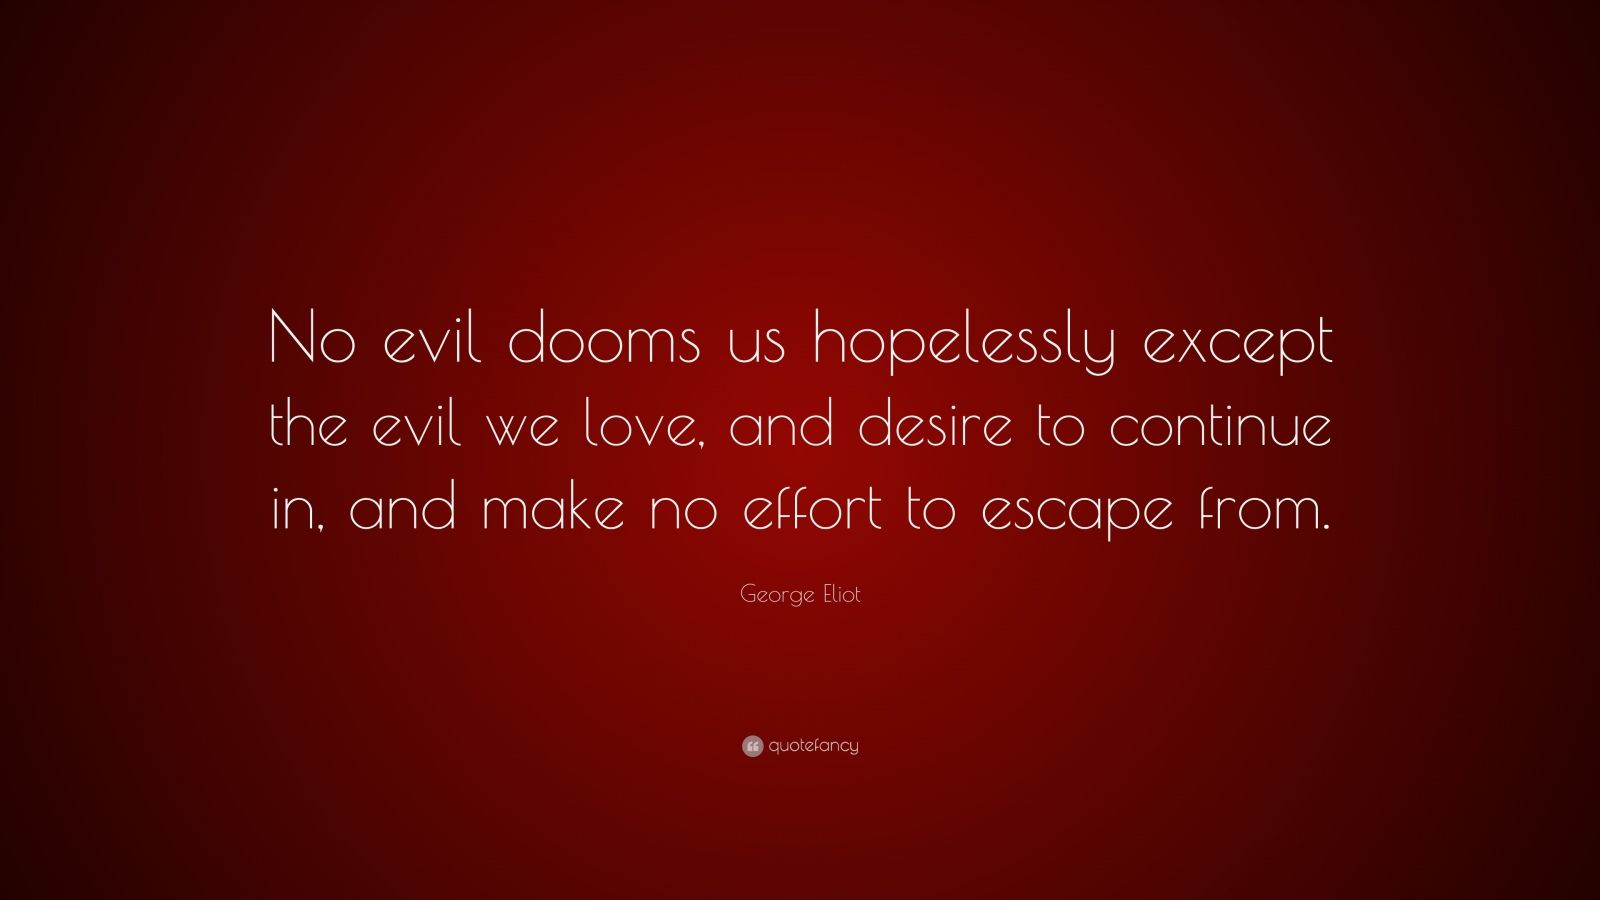 george eliot quote: "no evil dooms us hopelessly except the evil